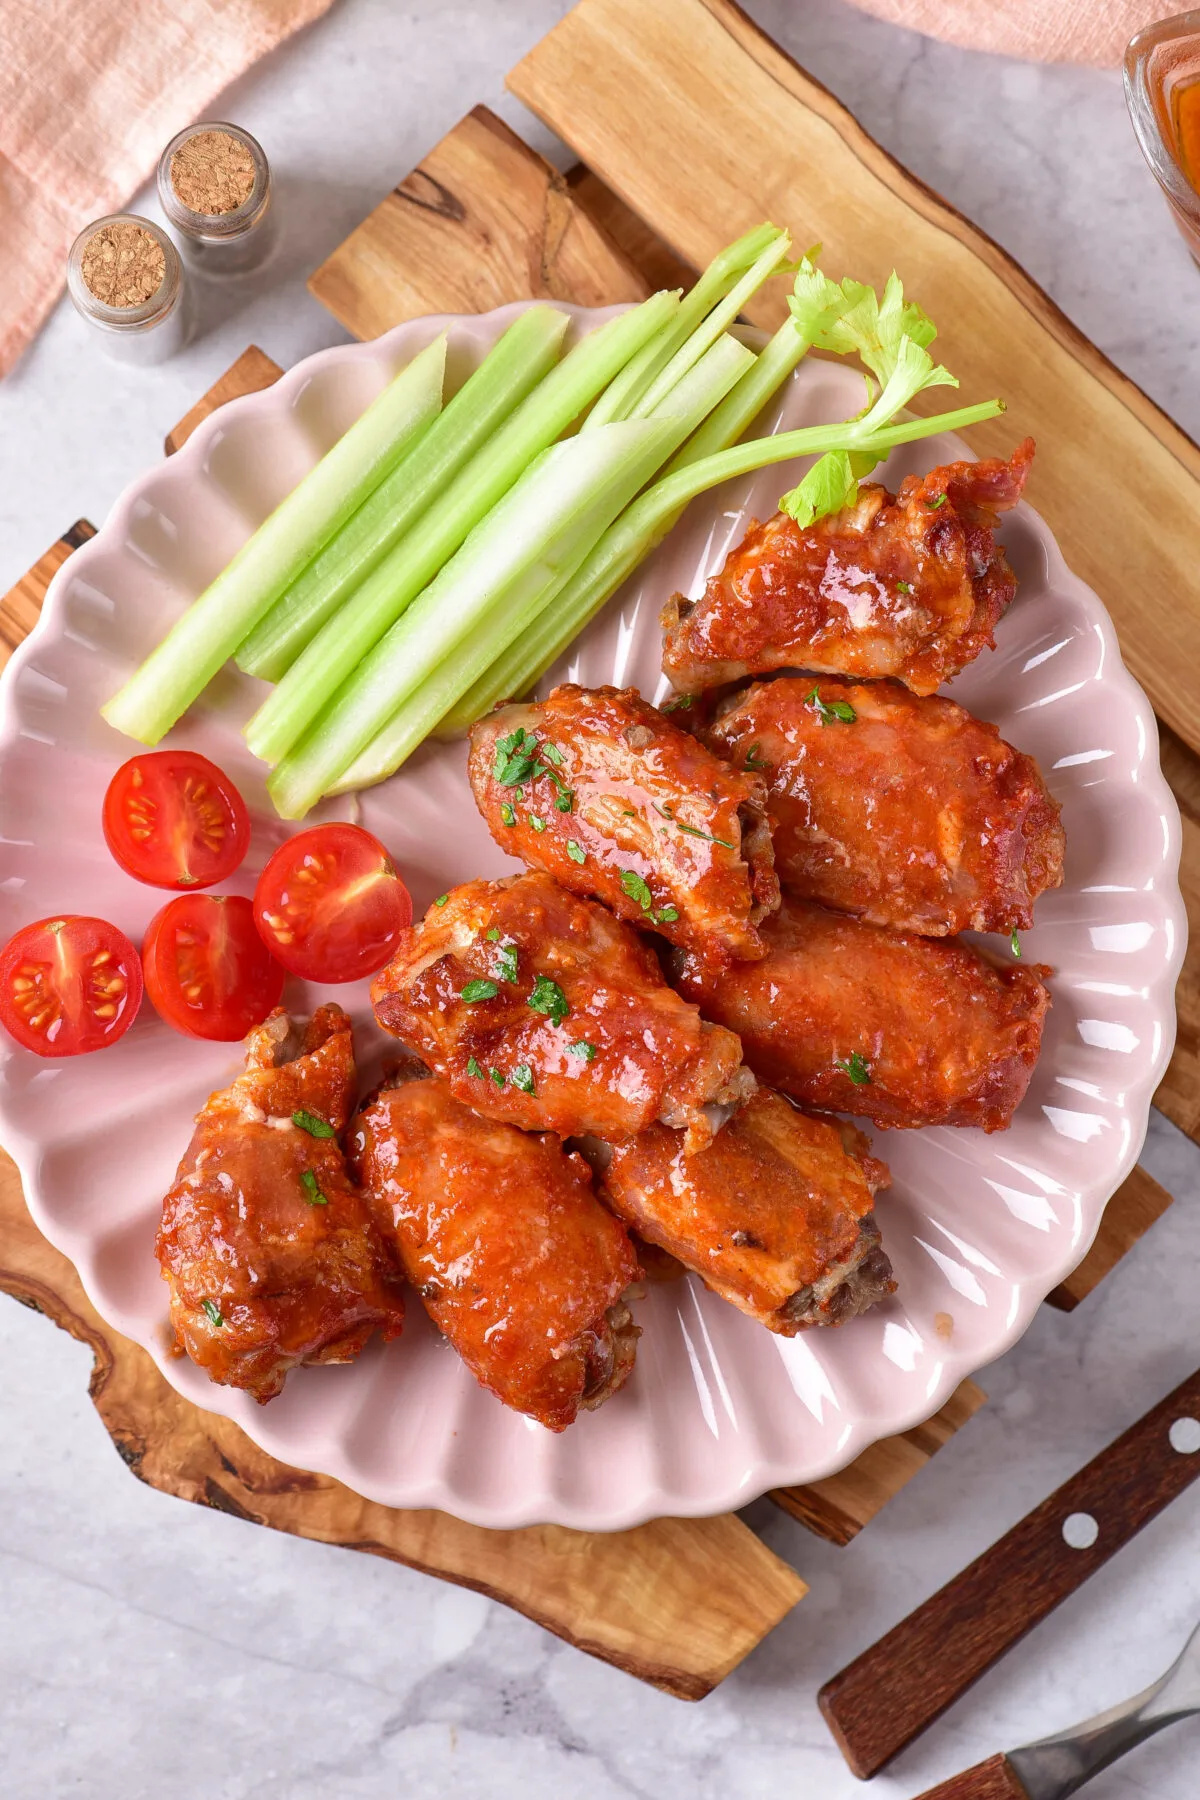 Love chicken wings? This maple-bacon chicken wings recipe is for you! They're crispy, juicy, and loaded with flavour.